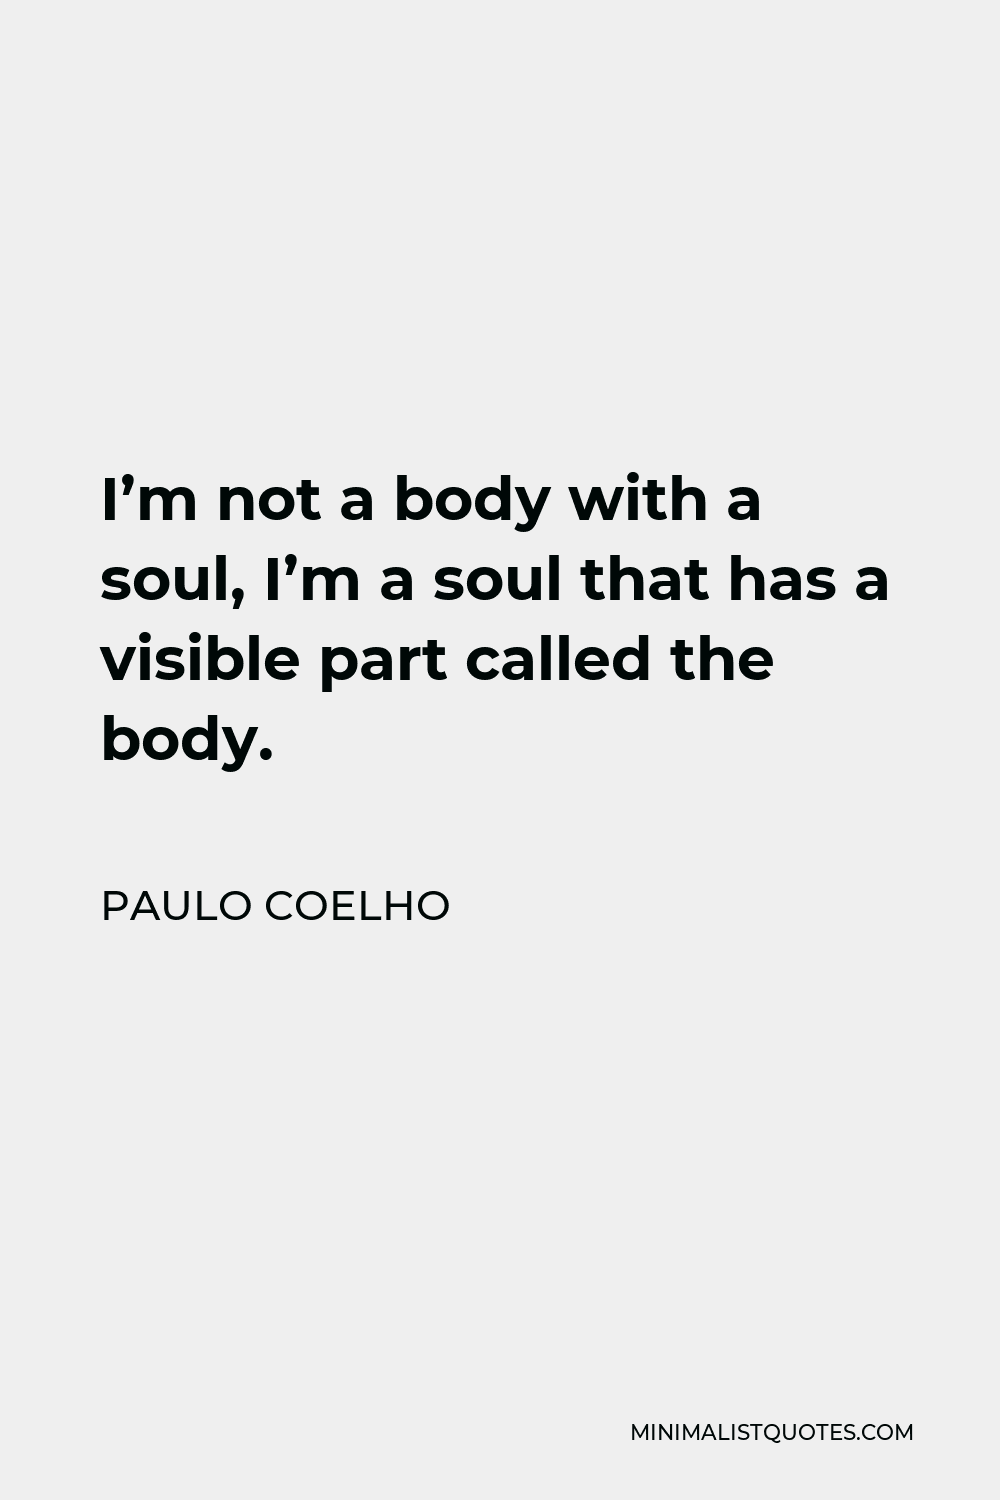 Paulo Coelho Quote - I’m not a body with a soul, I’m a soul that has a visible part called the body.